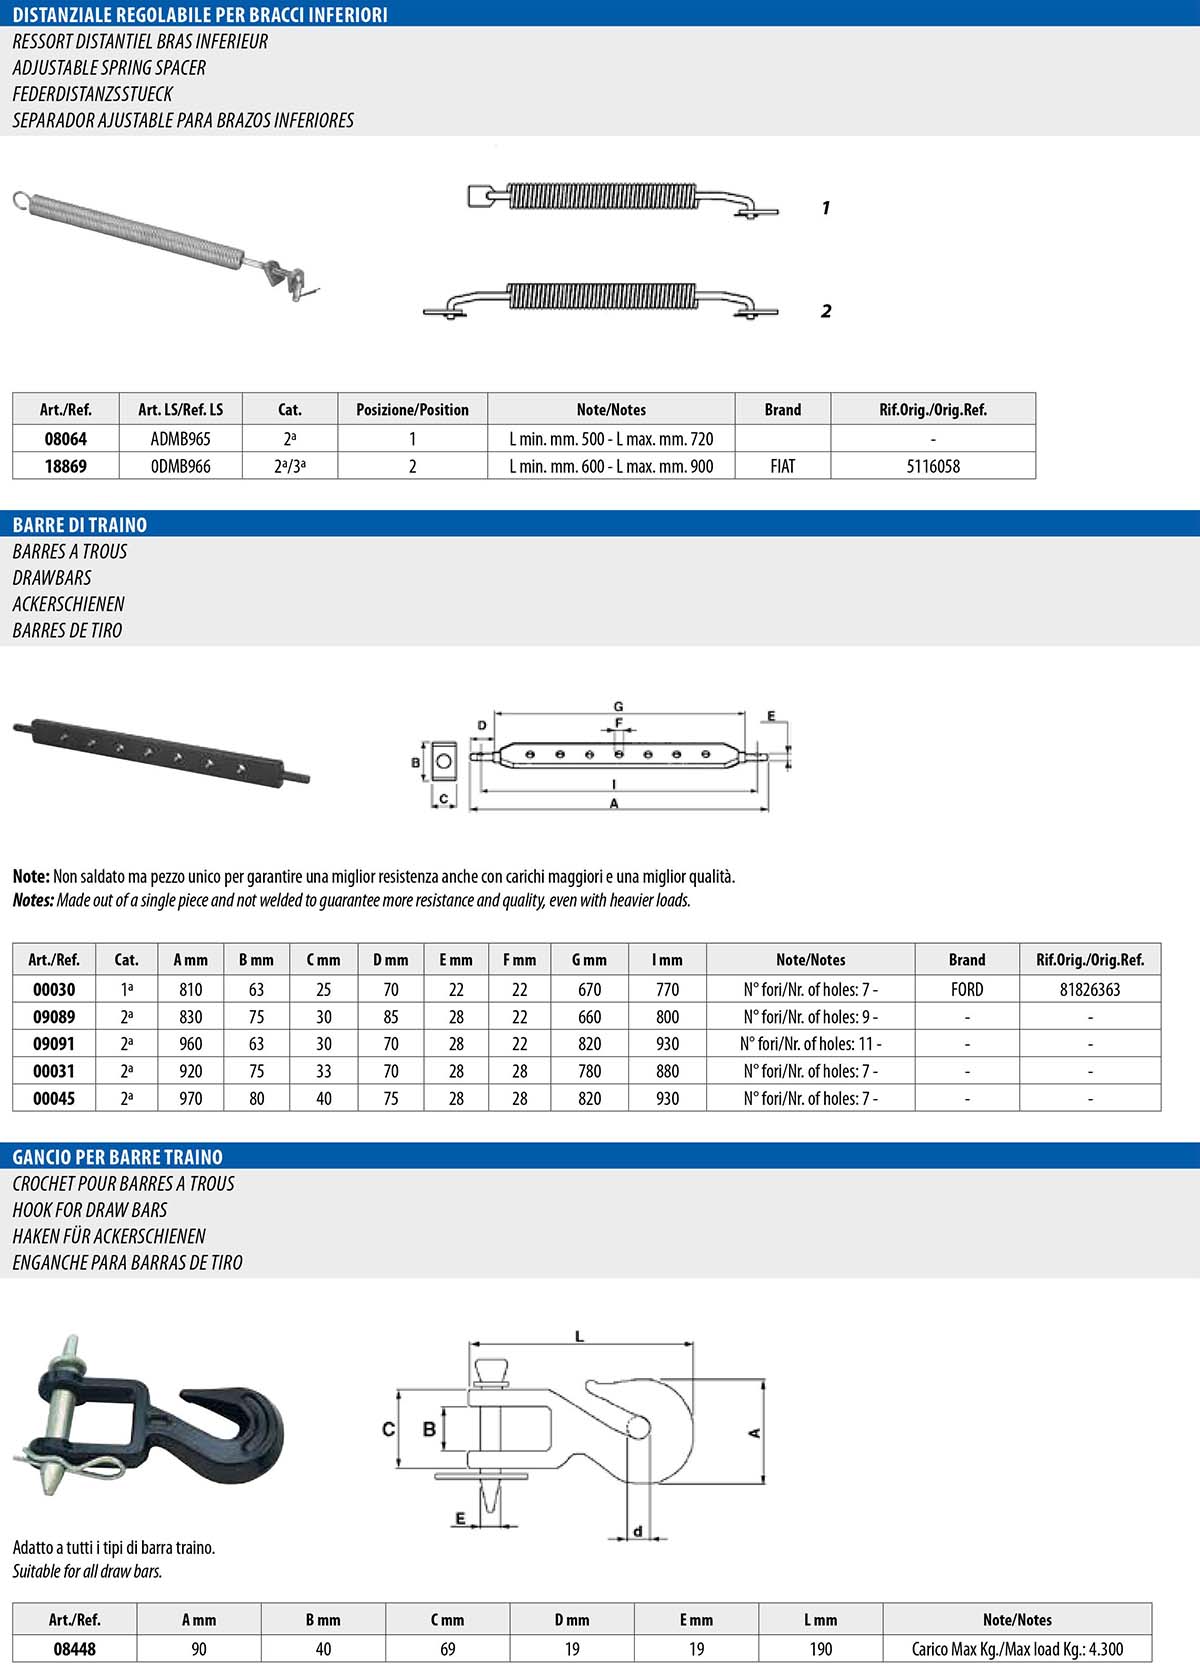 Fast-fitting hooks & elevator arms